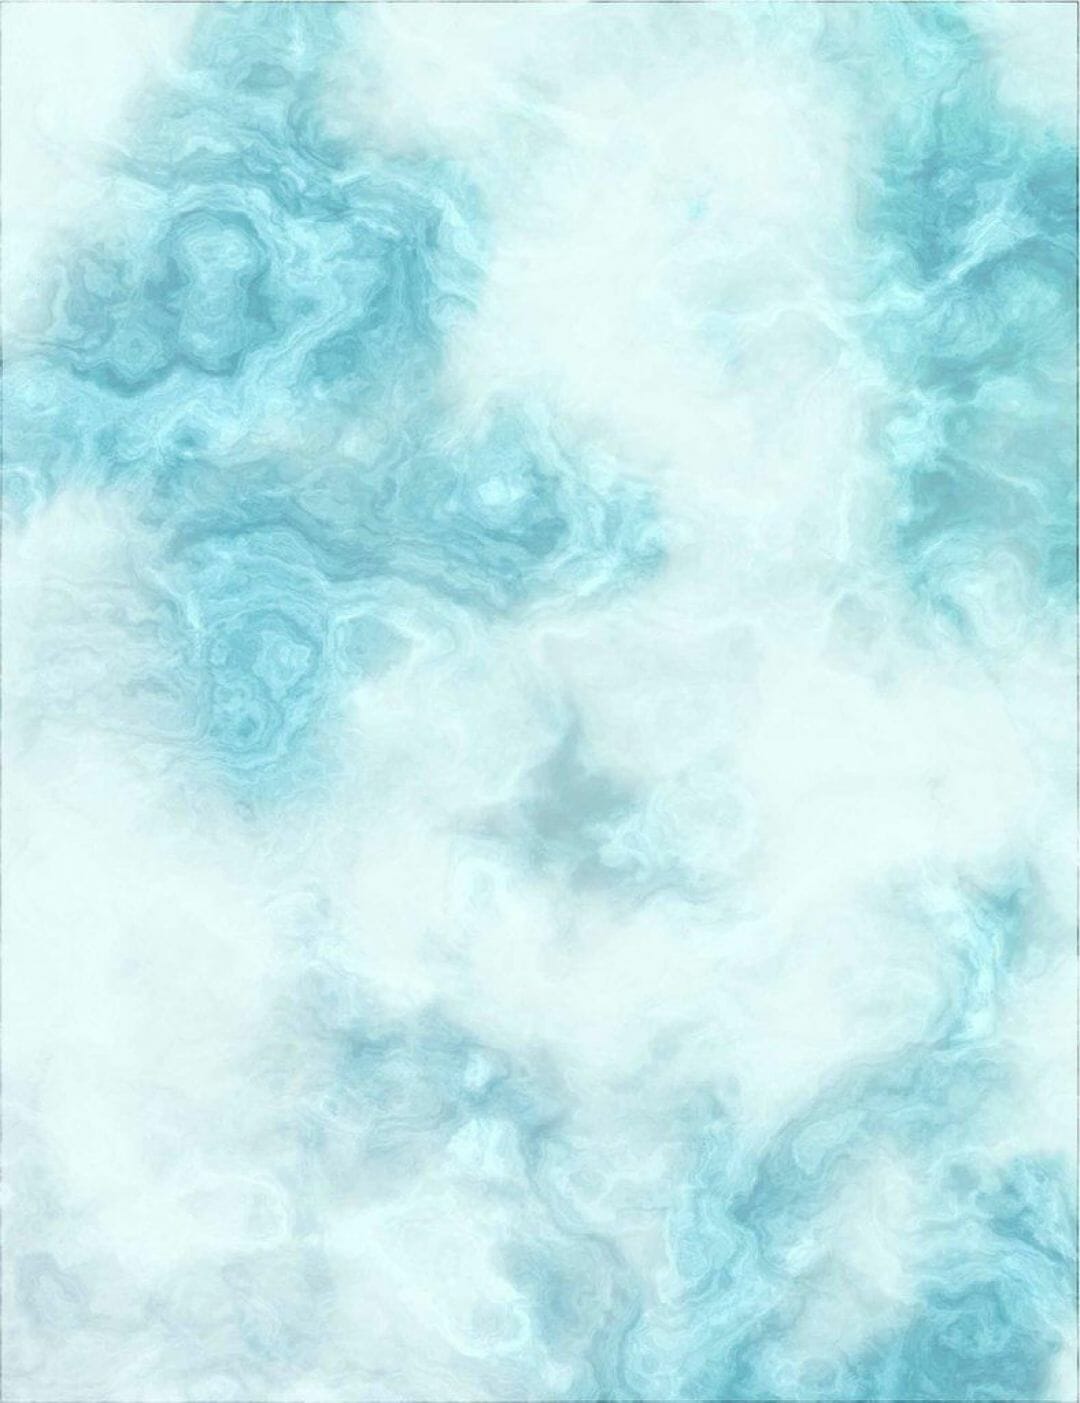 An abstract painting of clouds in blue and white - Cyan